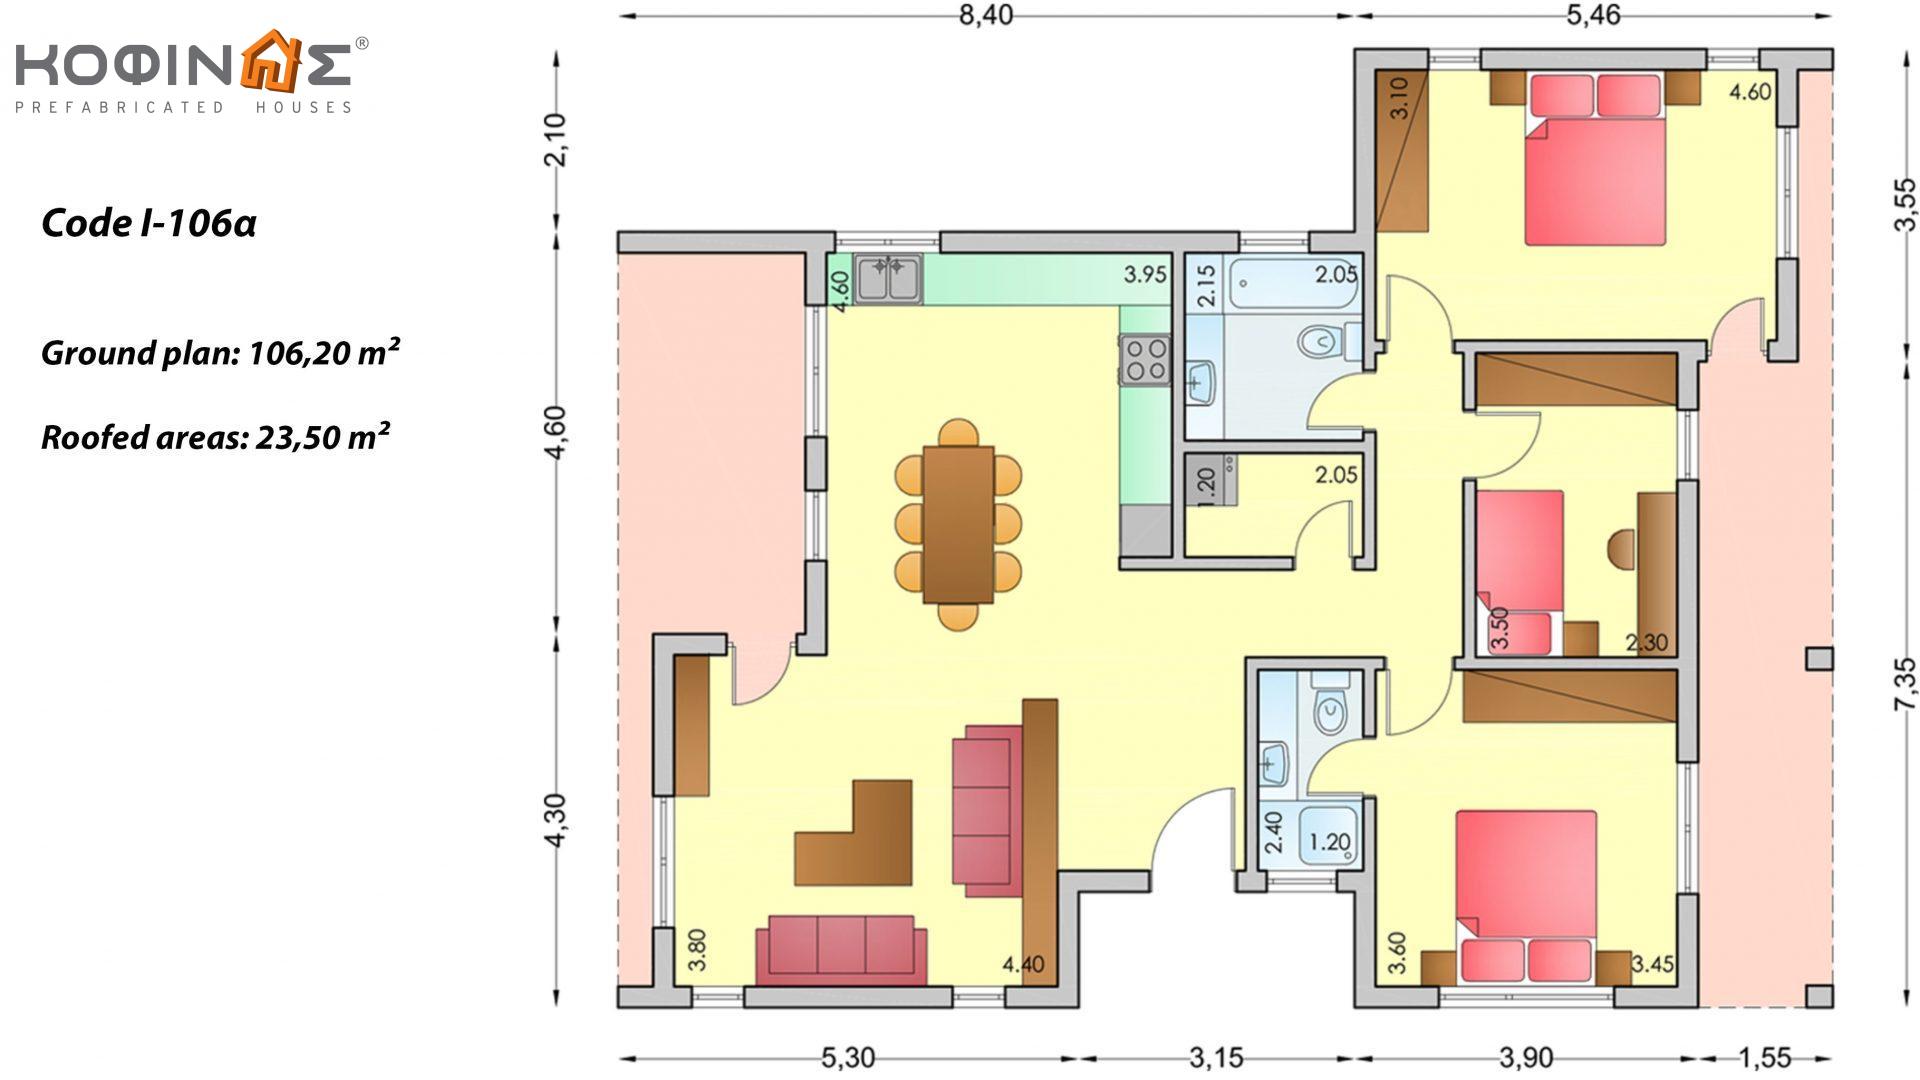 1-story house I-106a, total surface of 106,20 m², covered roofed areas 23,50 m²